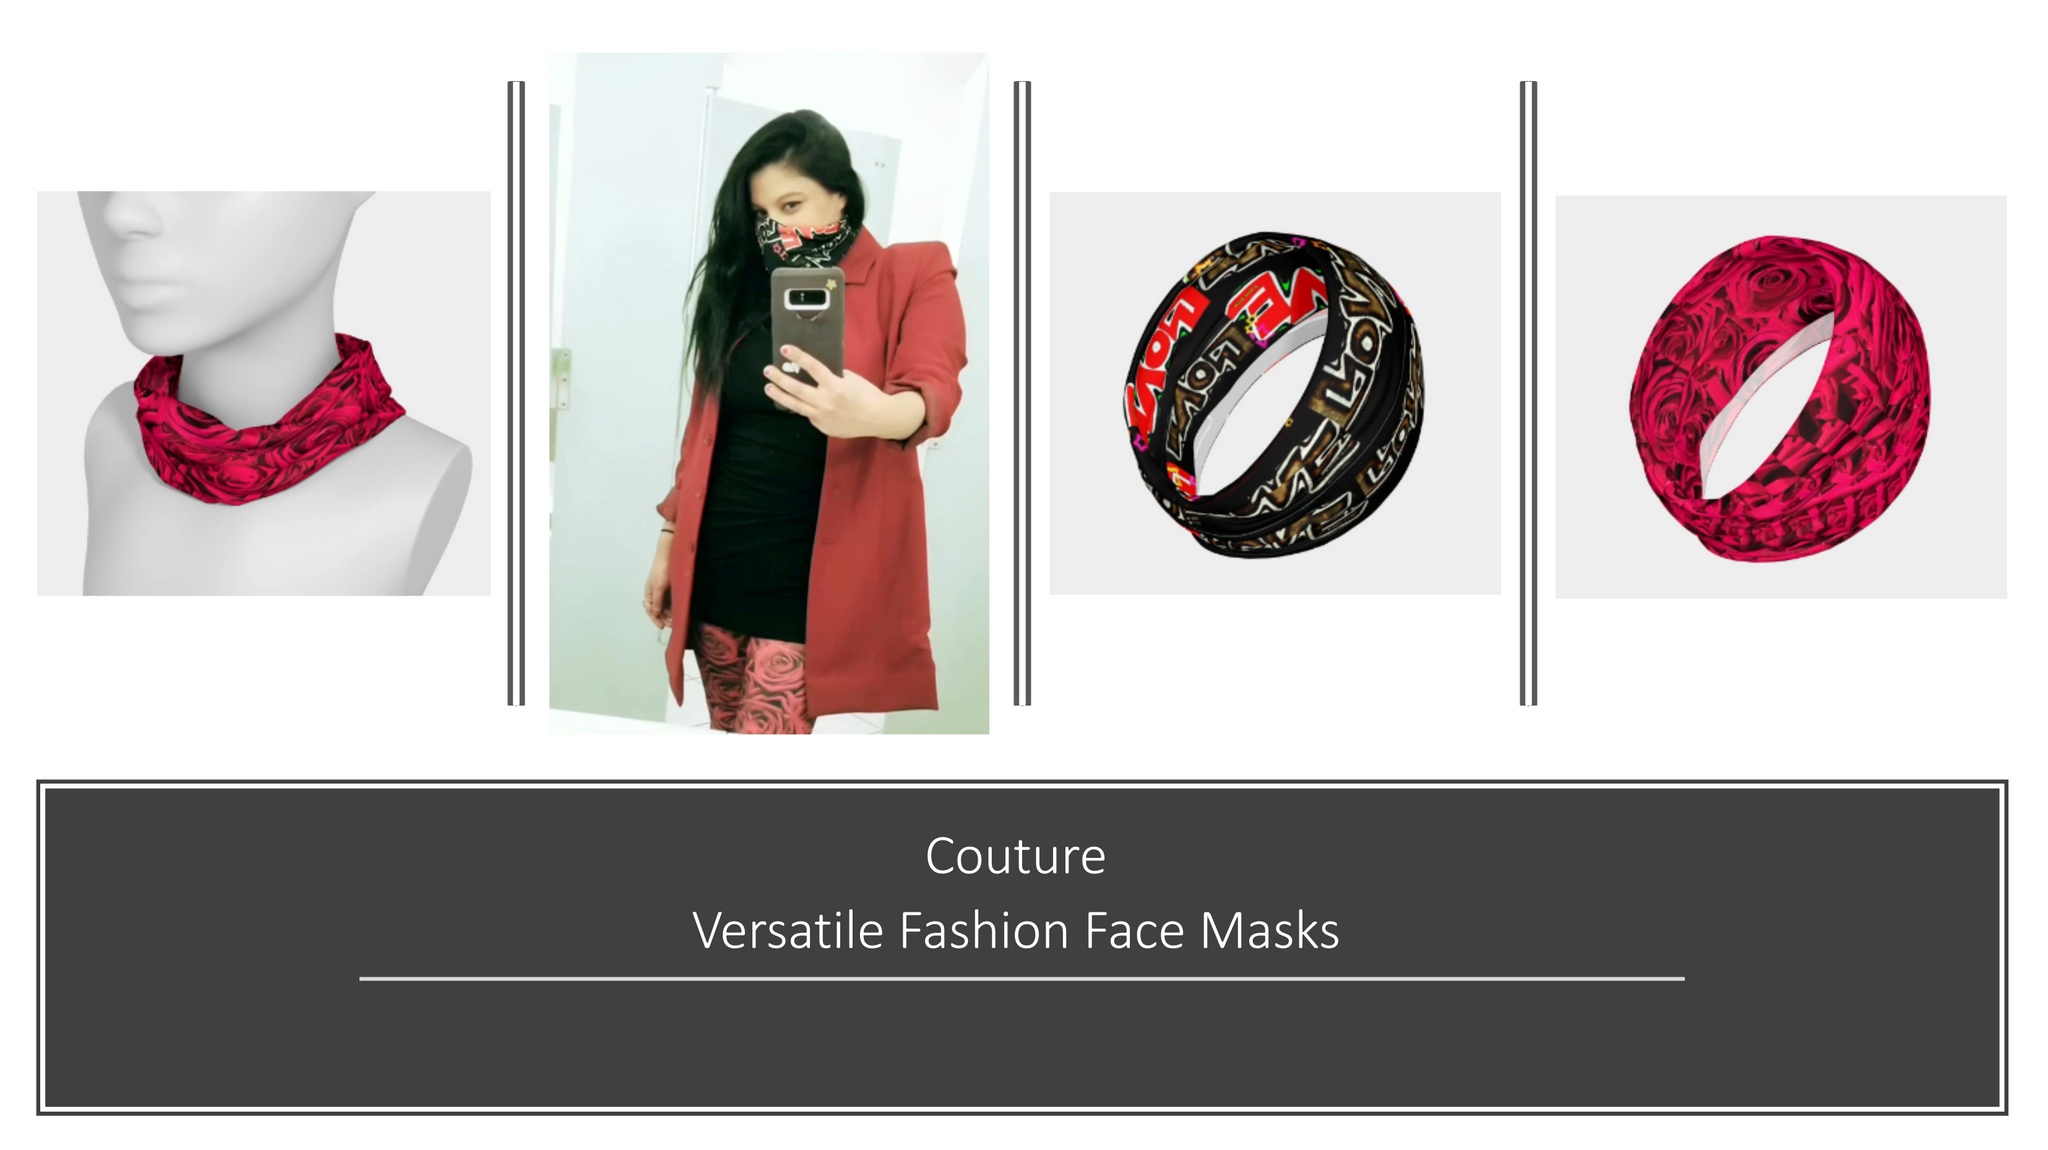 J'aime has created custom couture versatile fashion face masks that you can wear as a layer of protection during the coronavirus. 